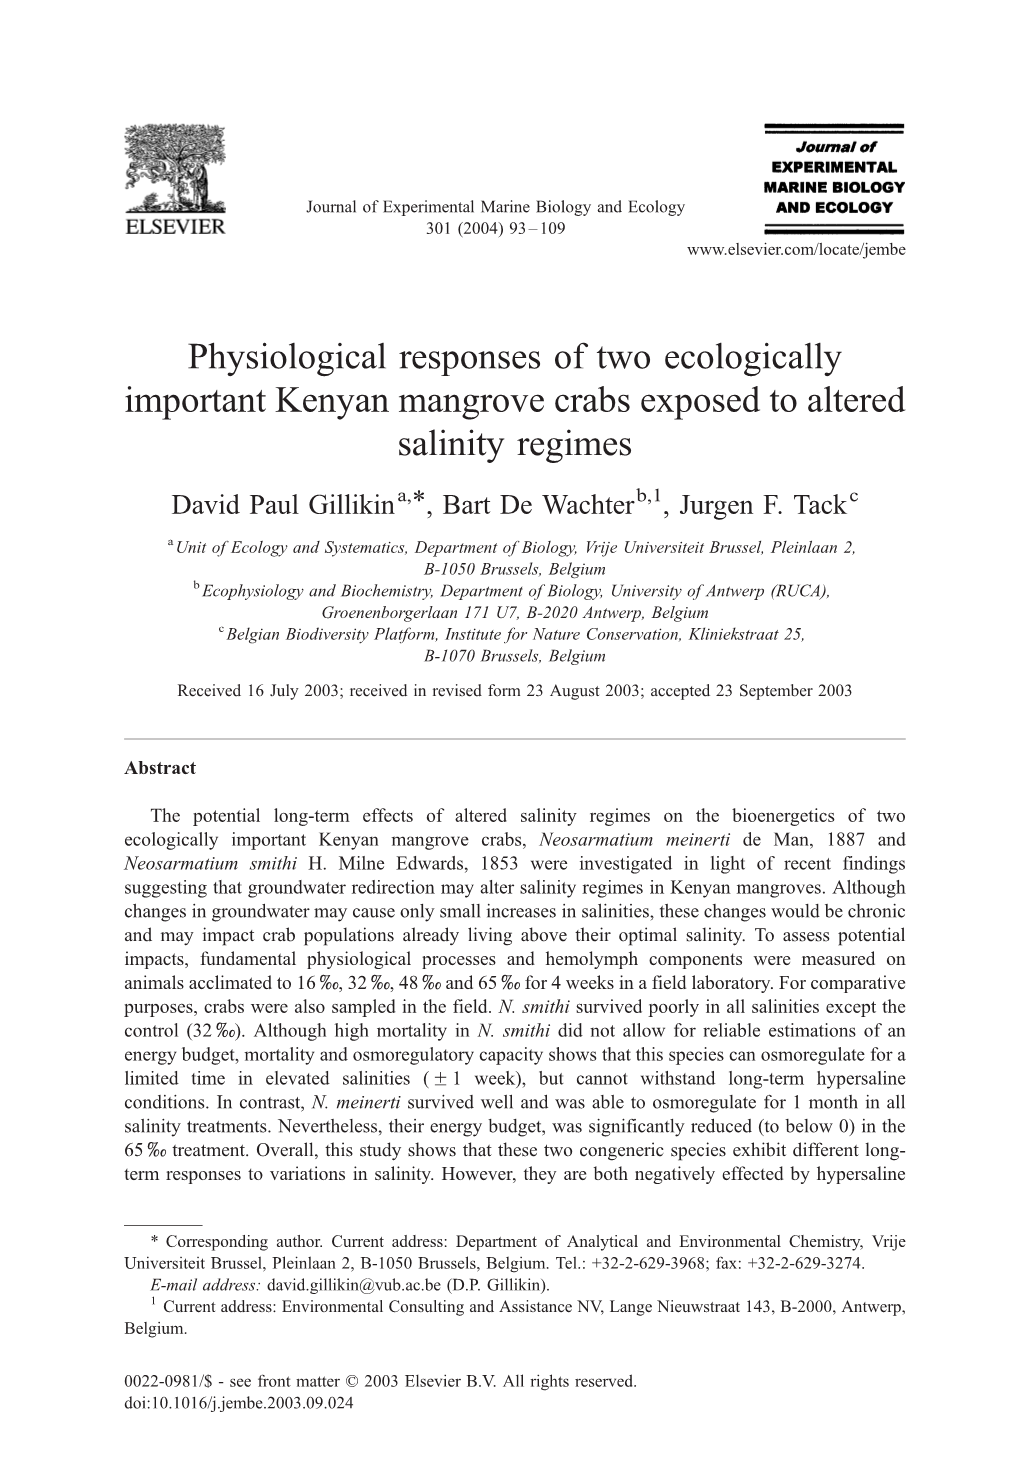 Physiological Responses of Two Ecologically Important Kenyan Mangrove Crabs Exposed to Altered Salinity Regimes